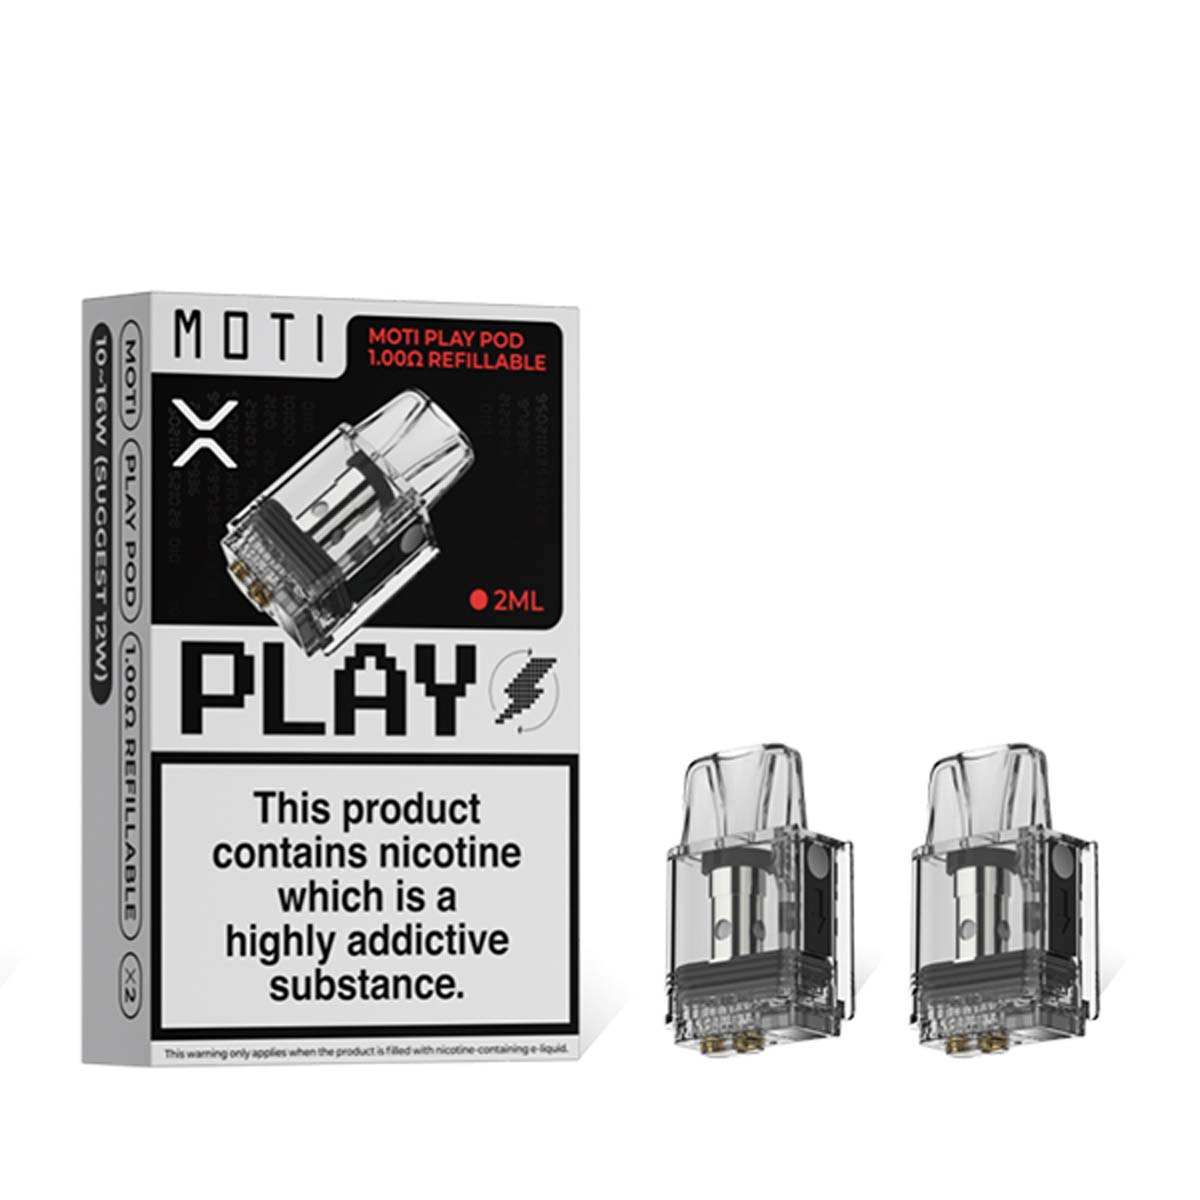 MOTI Play Replacement Refillable Pods 2 Pack